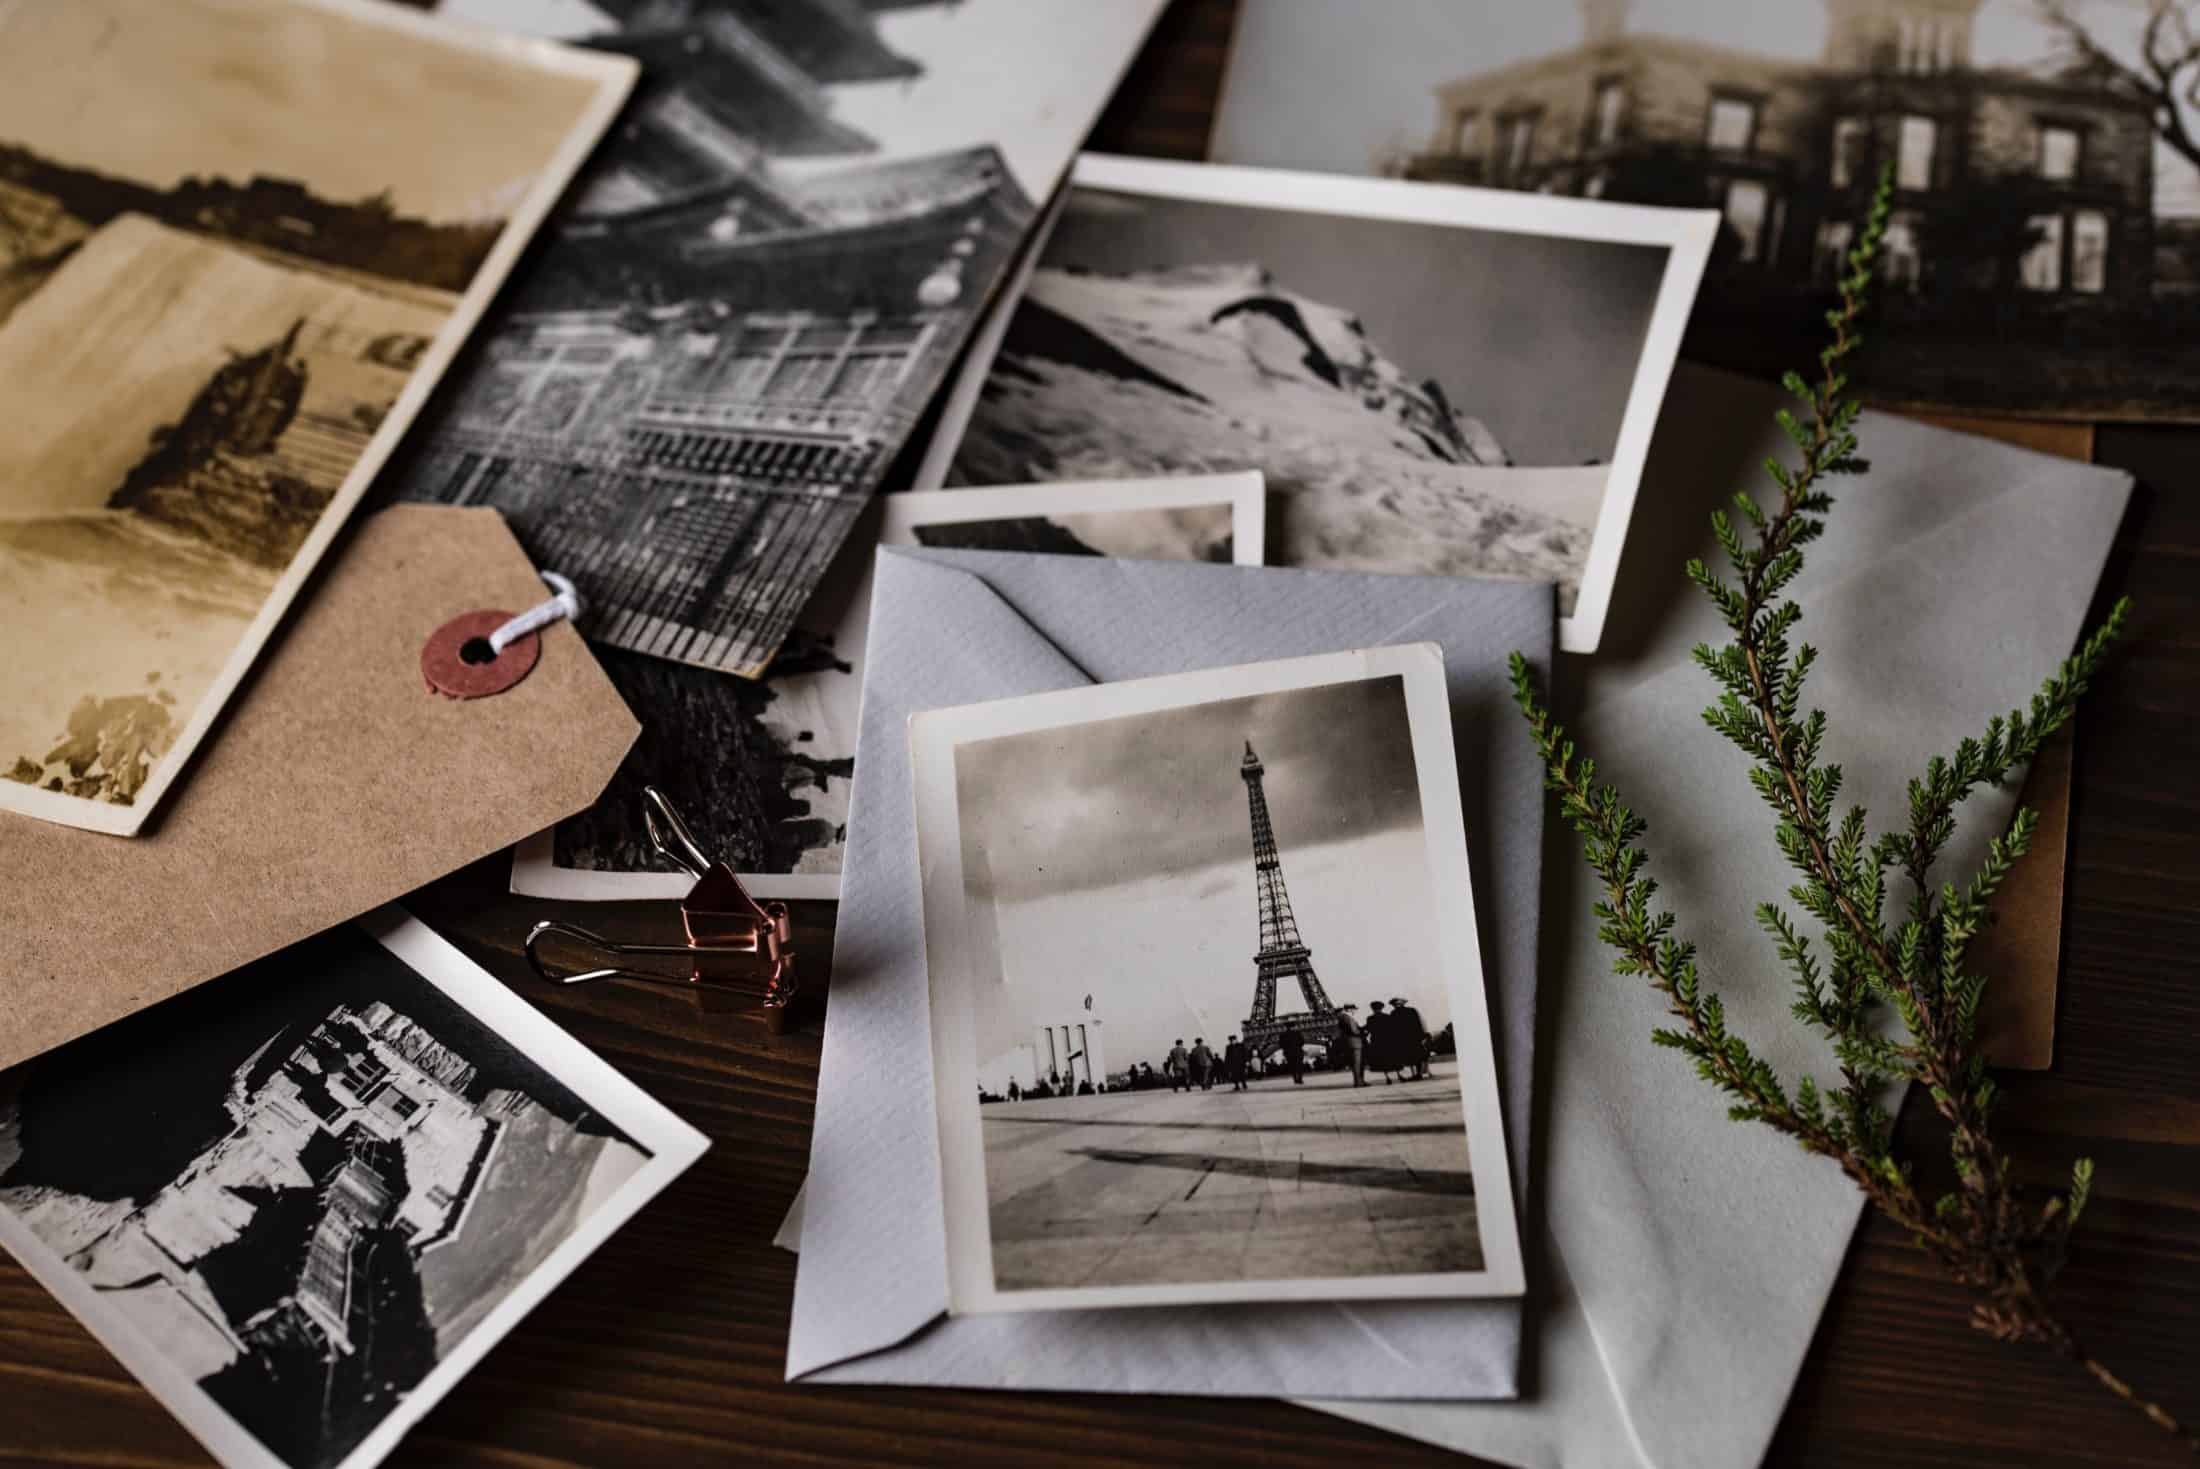 reminiscence therapy memory loss Alzheimer's dementia